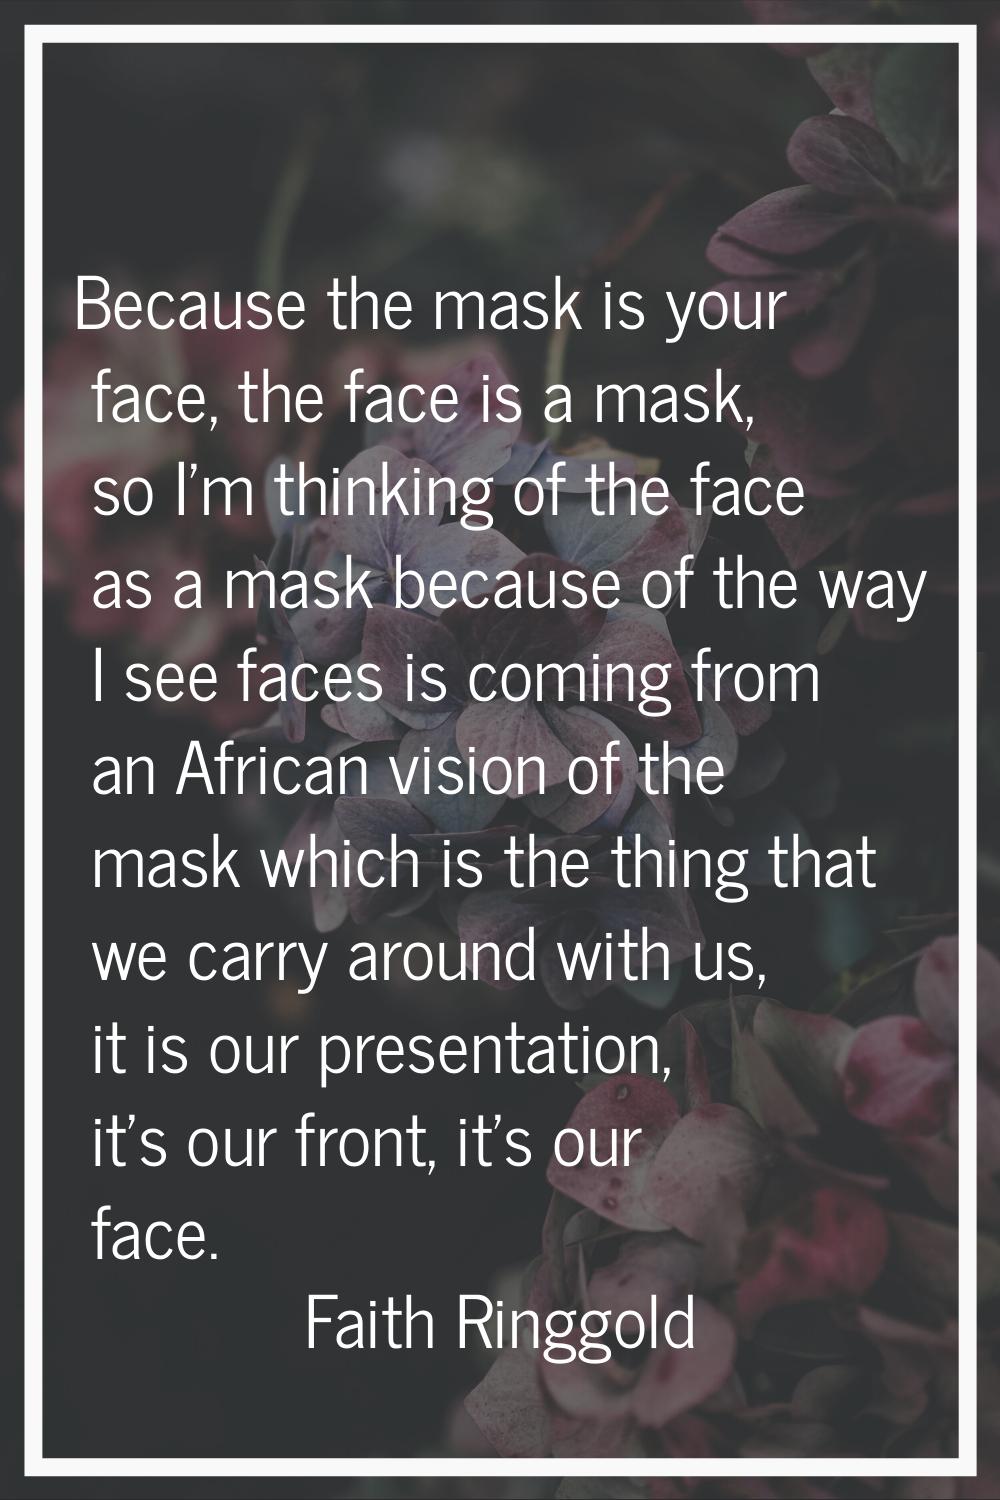 Because the mask is your face, the face is a mask, so I'm thinking of the face as a mask because of